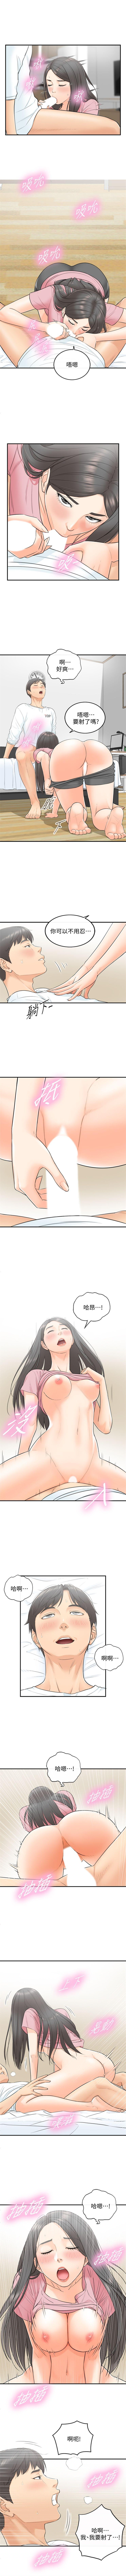 Playing 正妹小主管 1-52 官方中文（連載中） Tgirl - Page 6